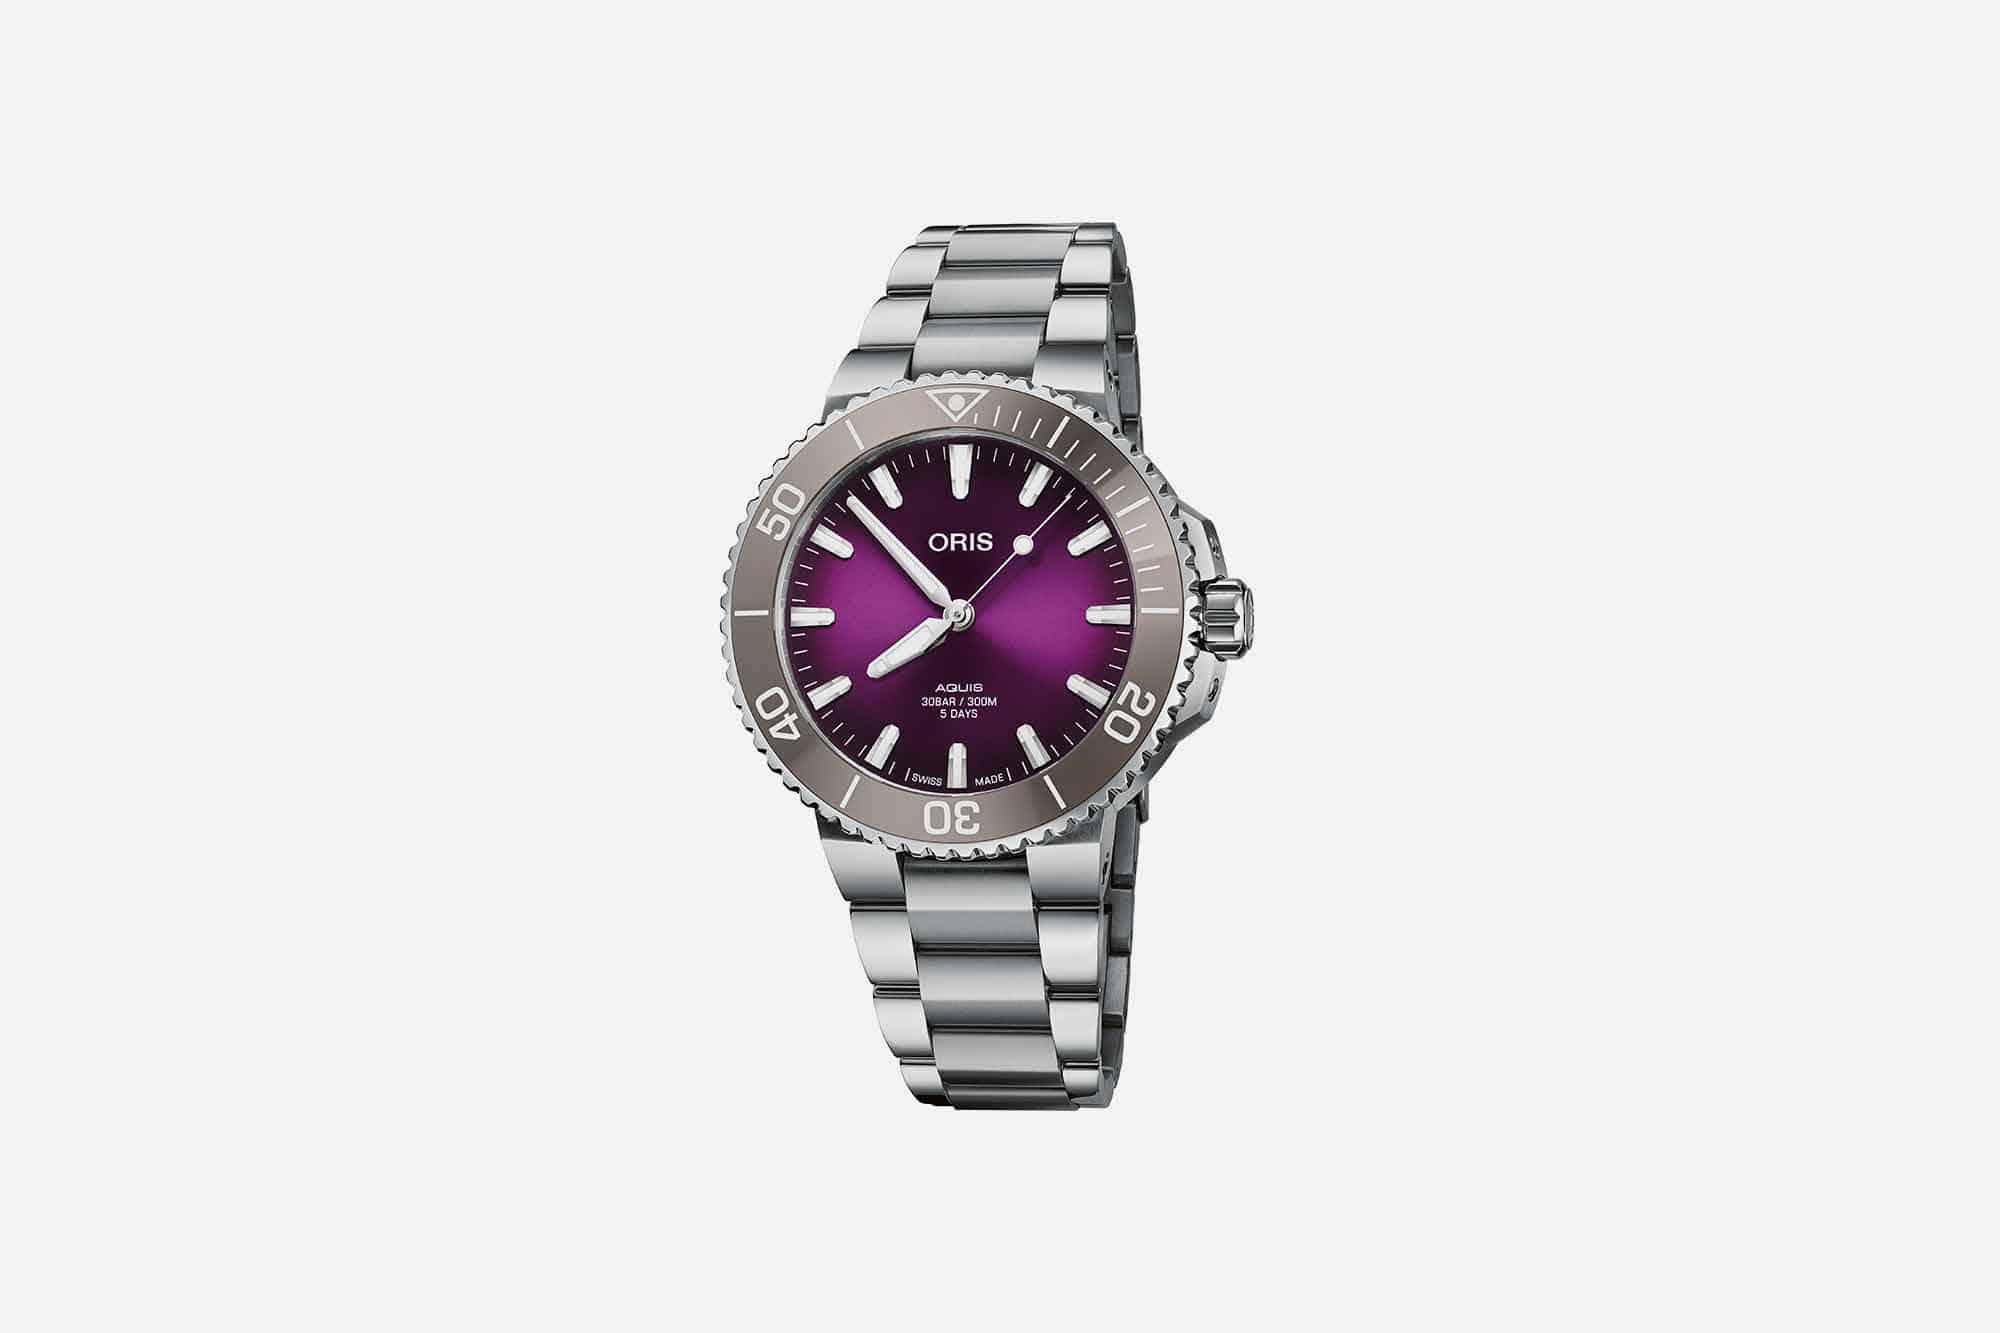 Oris Celebrates their Anniversary with the Latest Hölstein Edition Release: An Aquis with a Bold Purple Dial